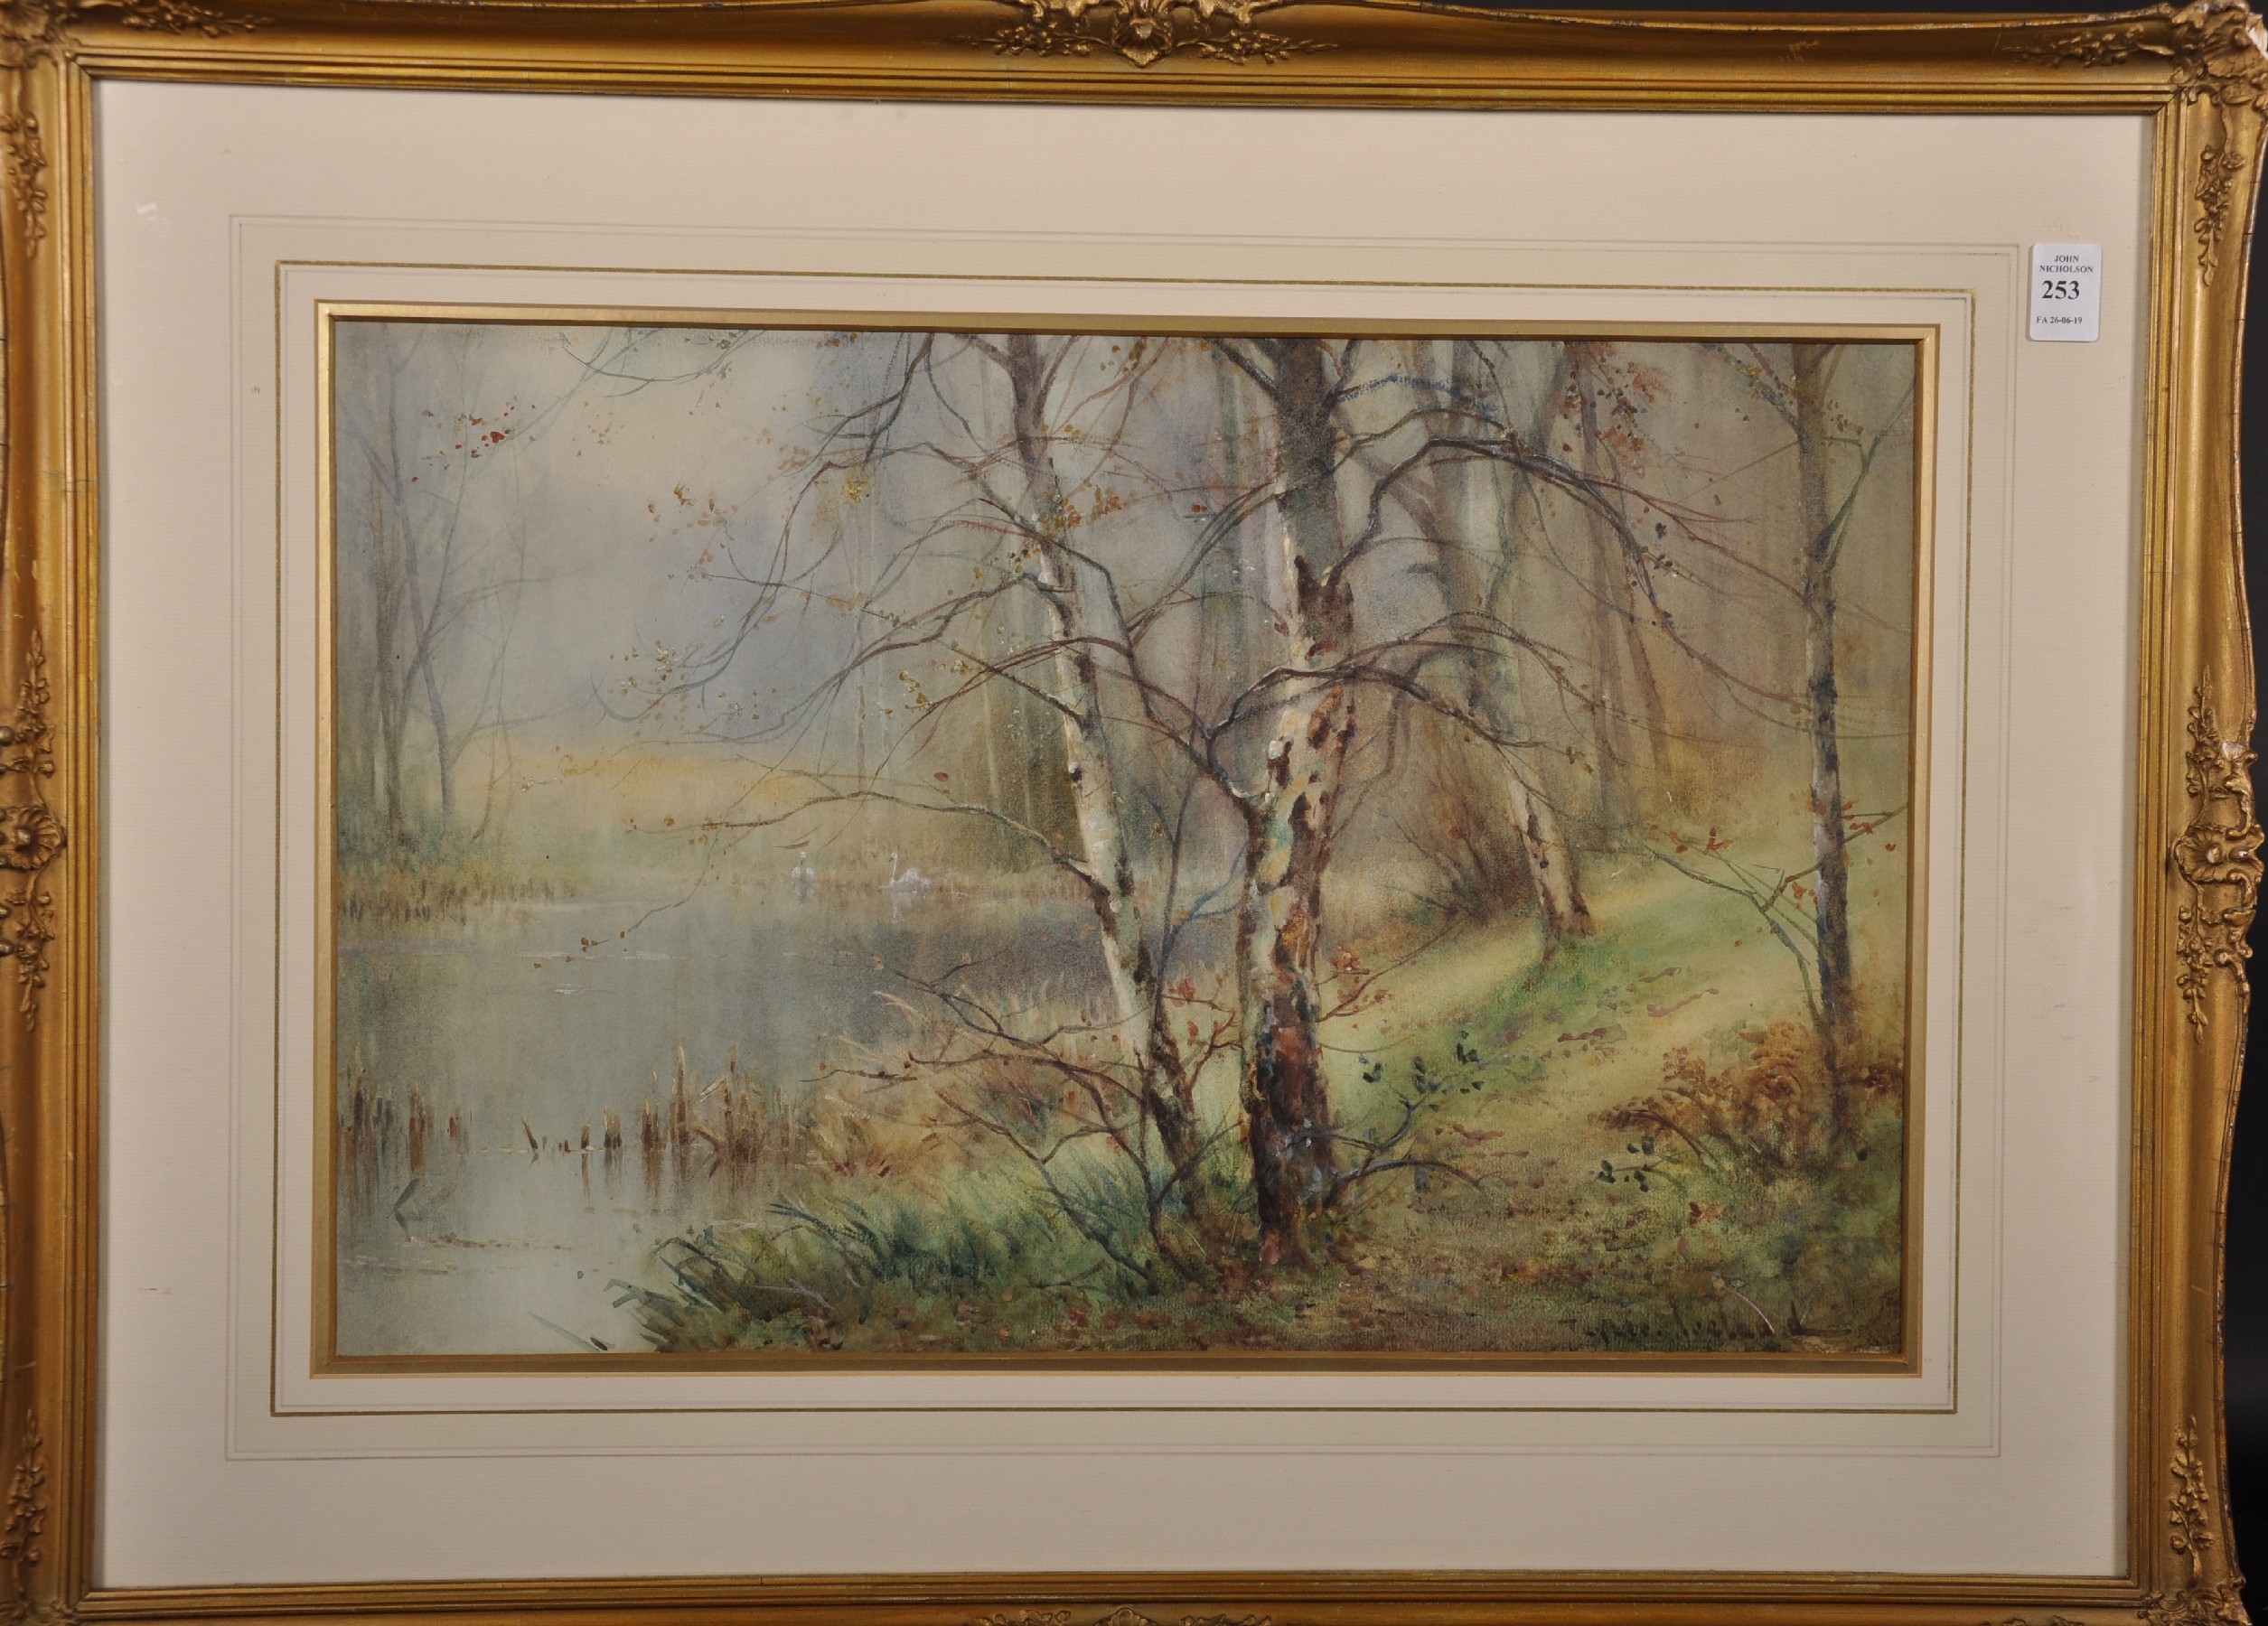 Thomas Taylor Ireland (act.1880-1927) British. A Wooded River Landscape, with Swans in the distance, - Image 2 of 4